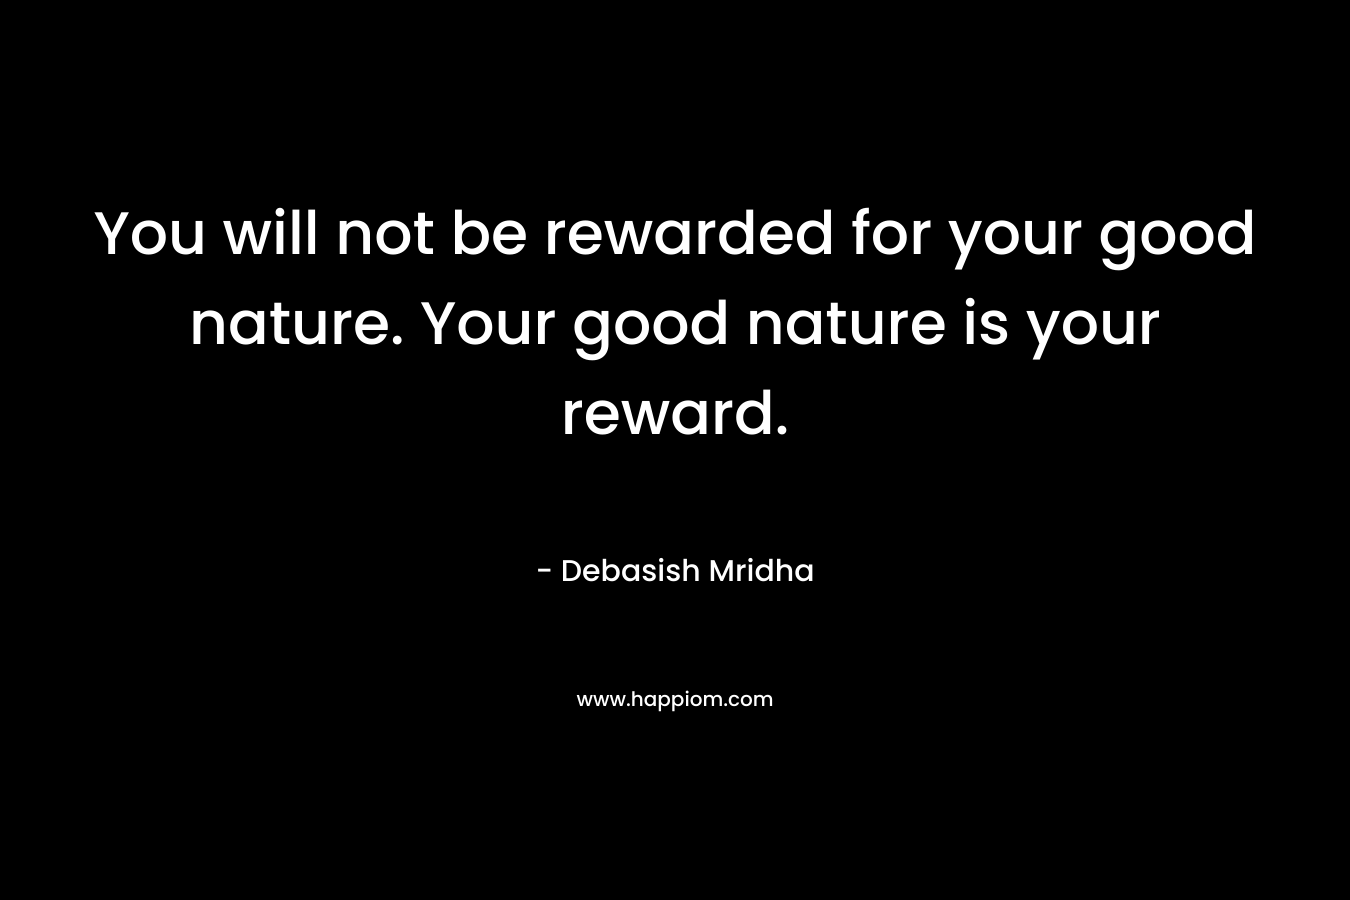 You will not be rewarded for your good nature. Your good nature is your reward. – Debasish Mridha